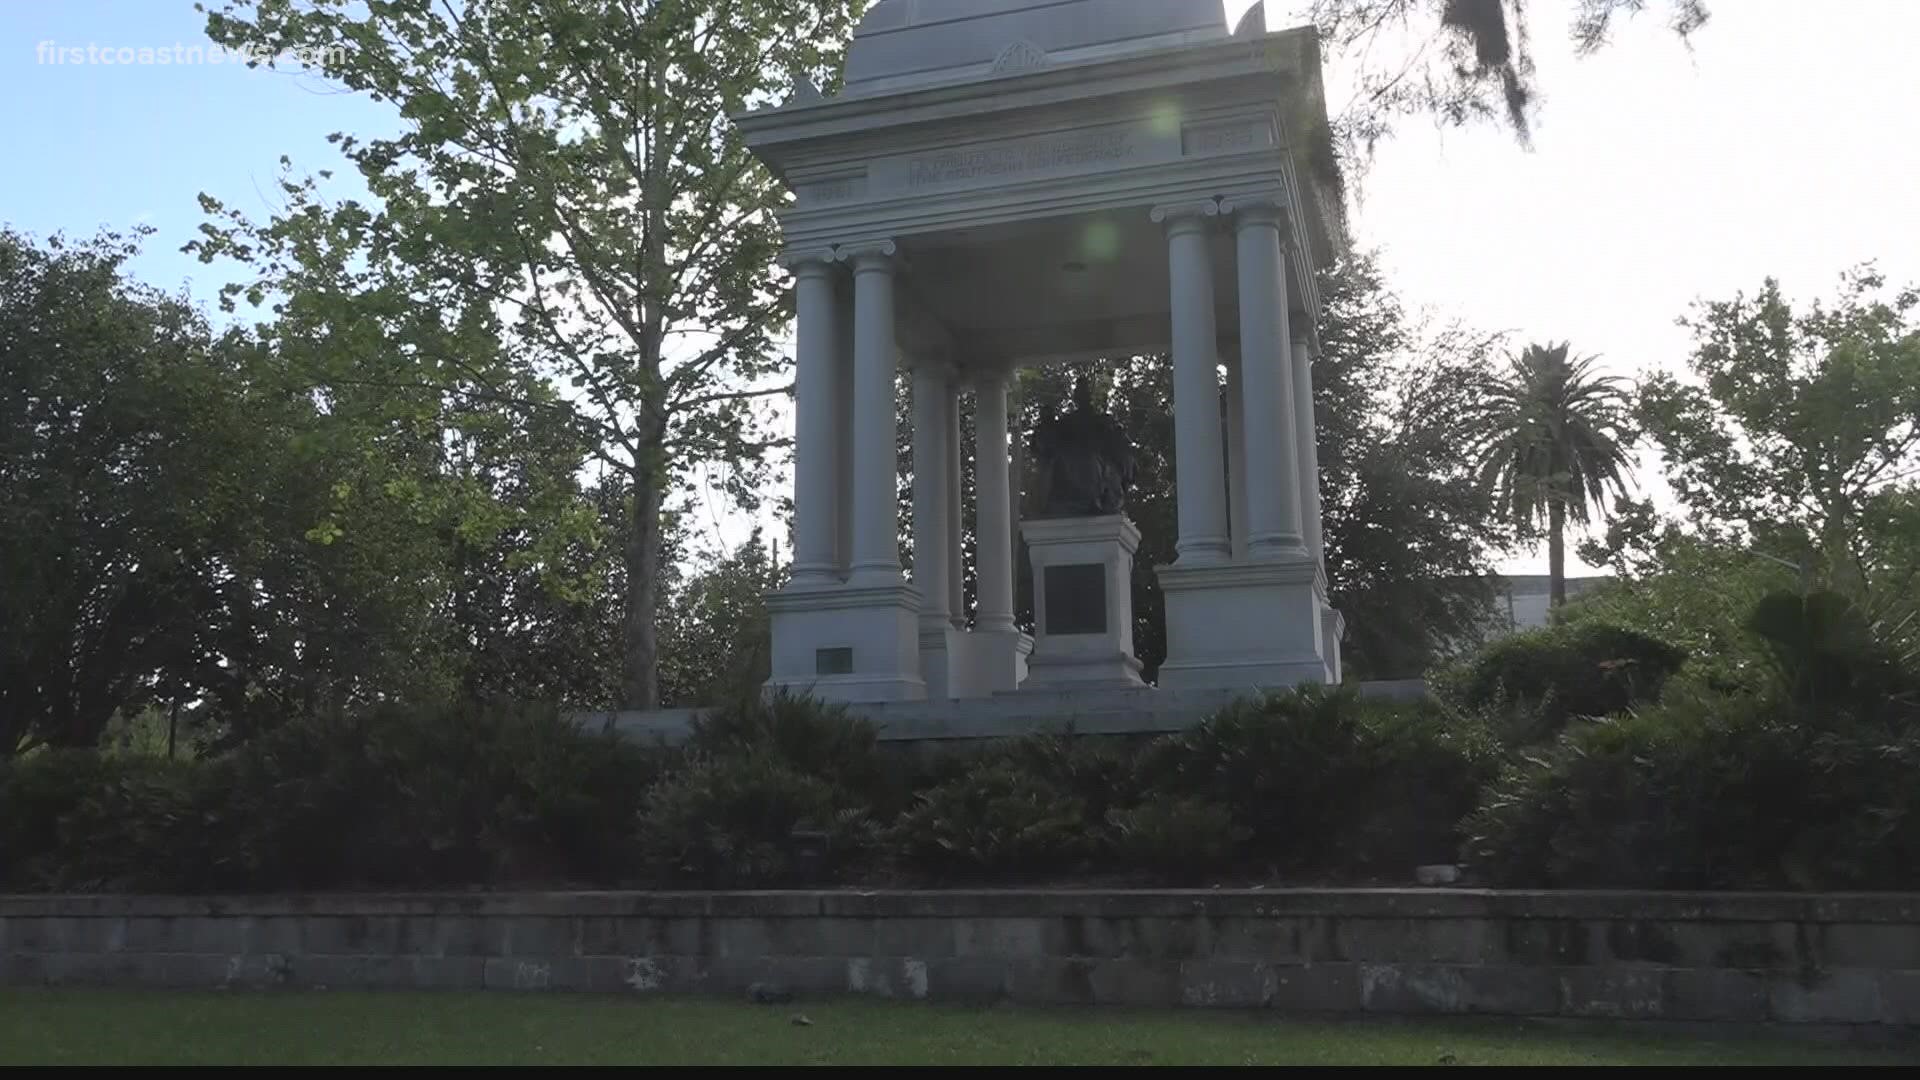 The bill that would have led to the removal of the Women of the Confederacy monument in Springfield park has been withdrawn.